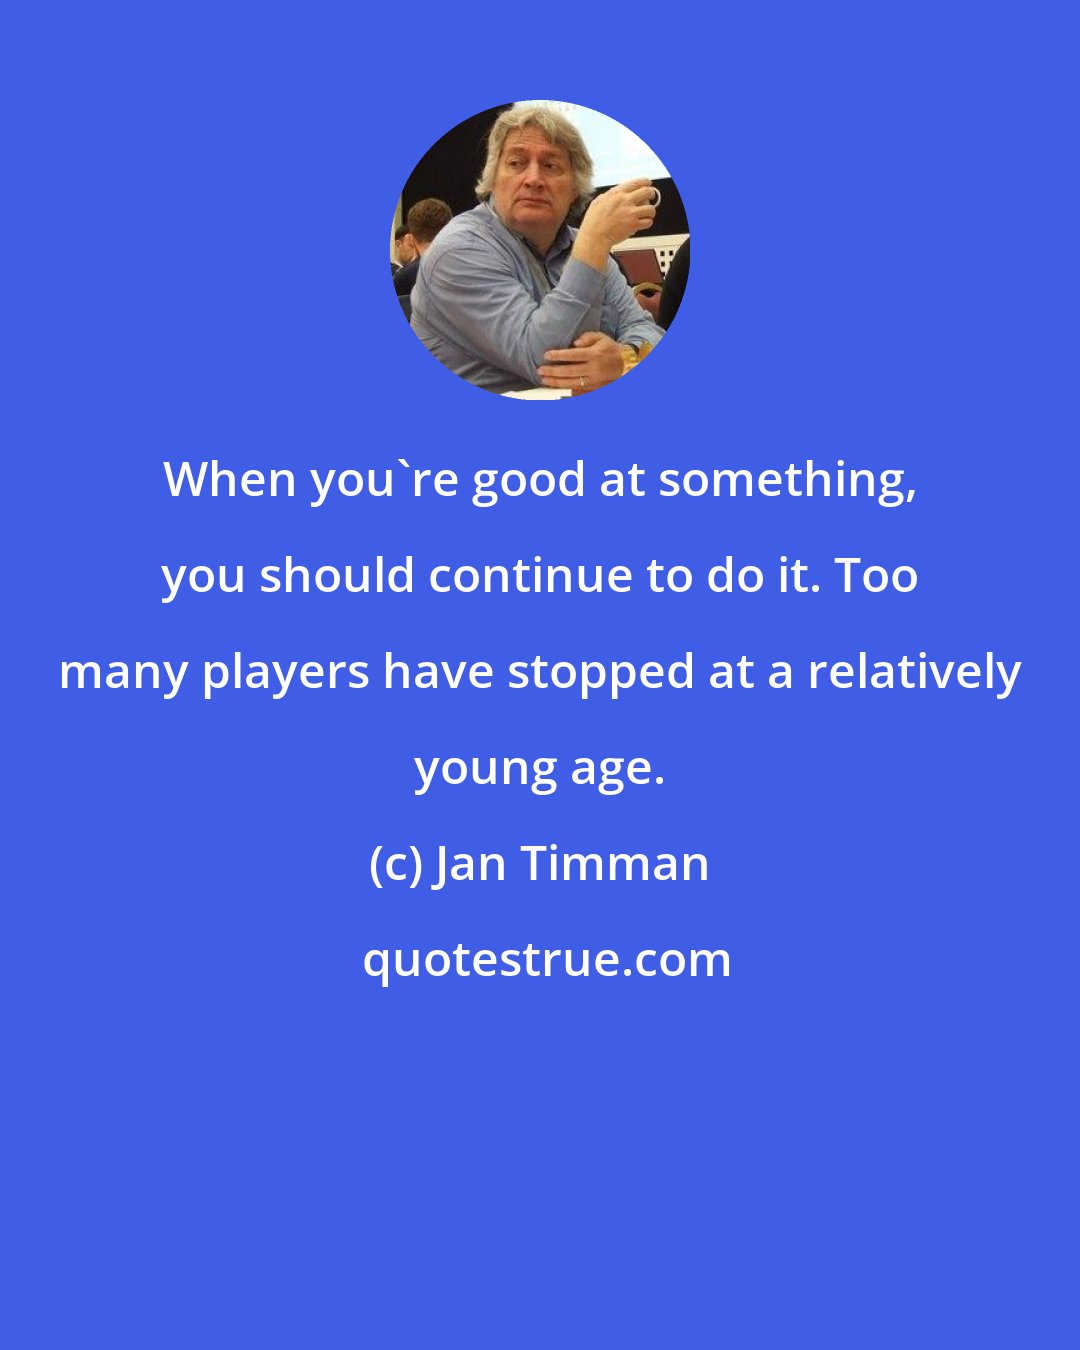 Jan Timman: When you're good at something, you should continue to do it. Too many players have stopped at a relatively young age.